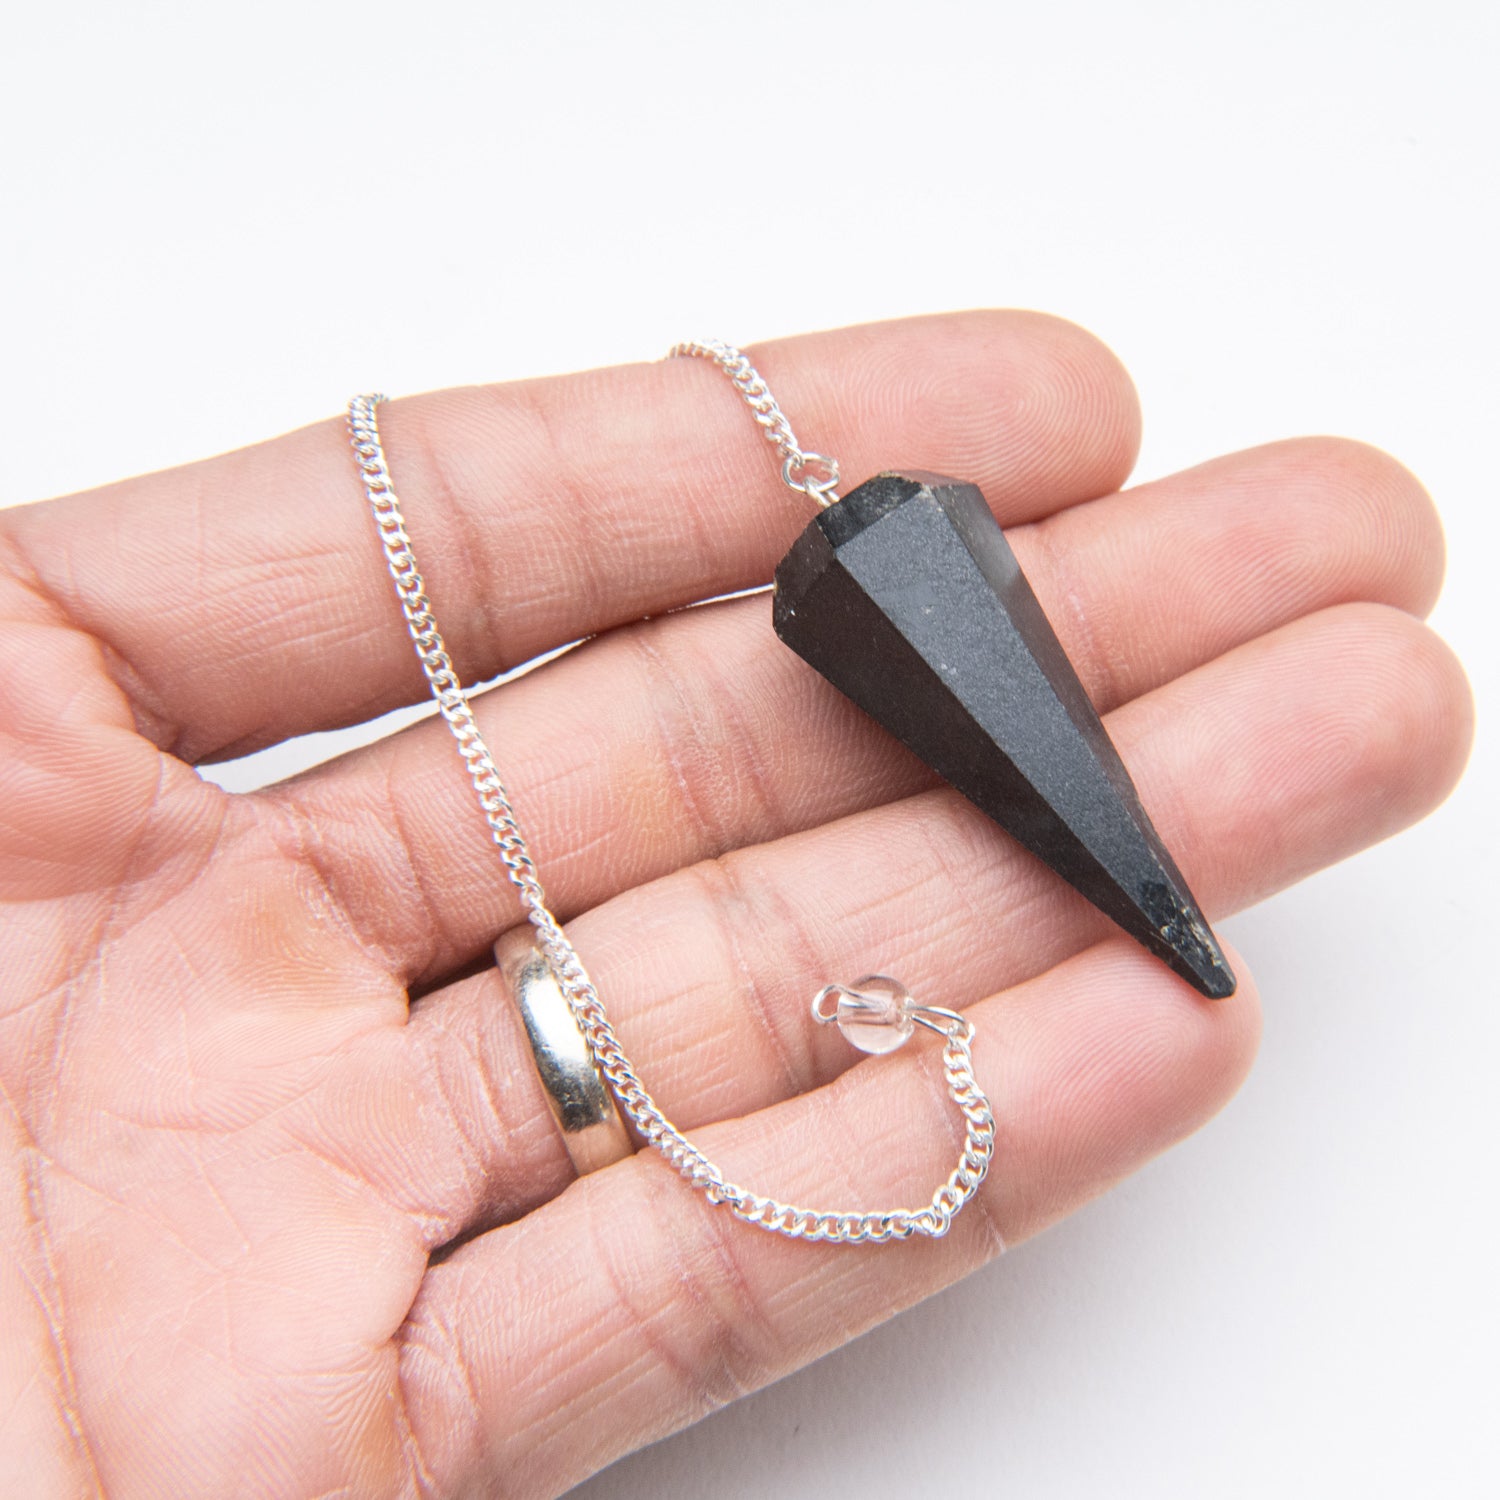 Genuine Polished Black Tourmaline Pendulum (with Chain) with black velvet pouch